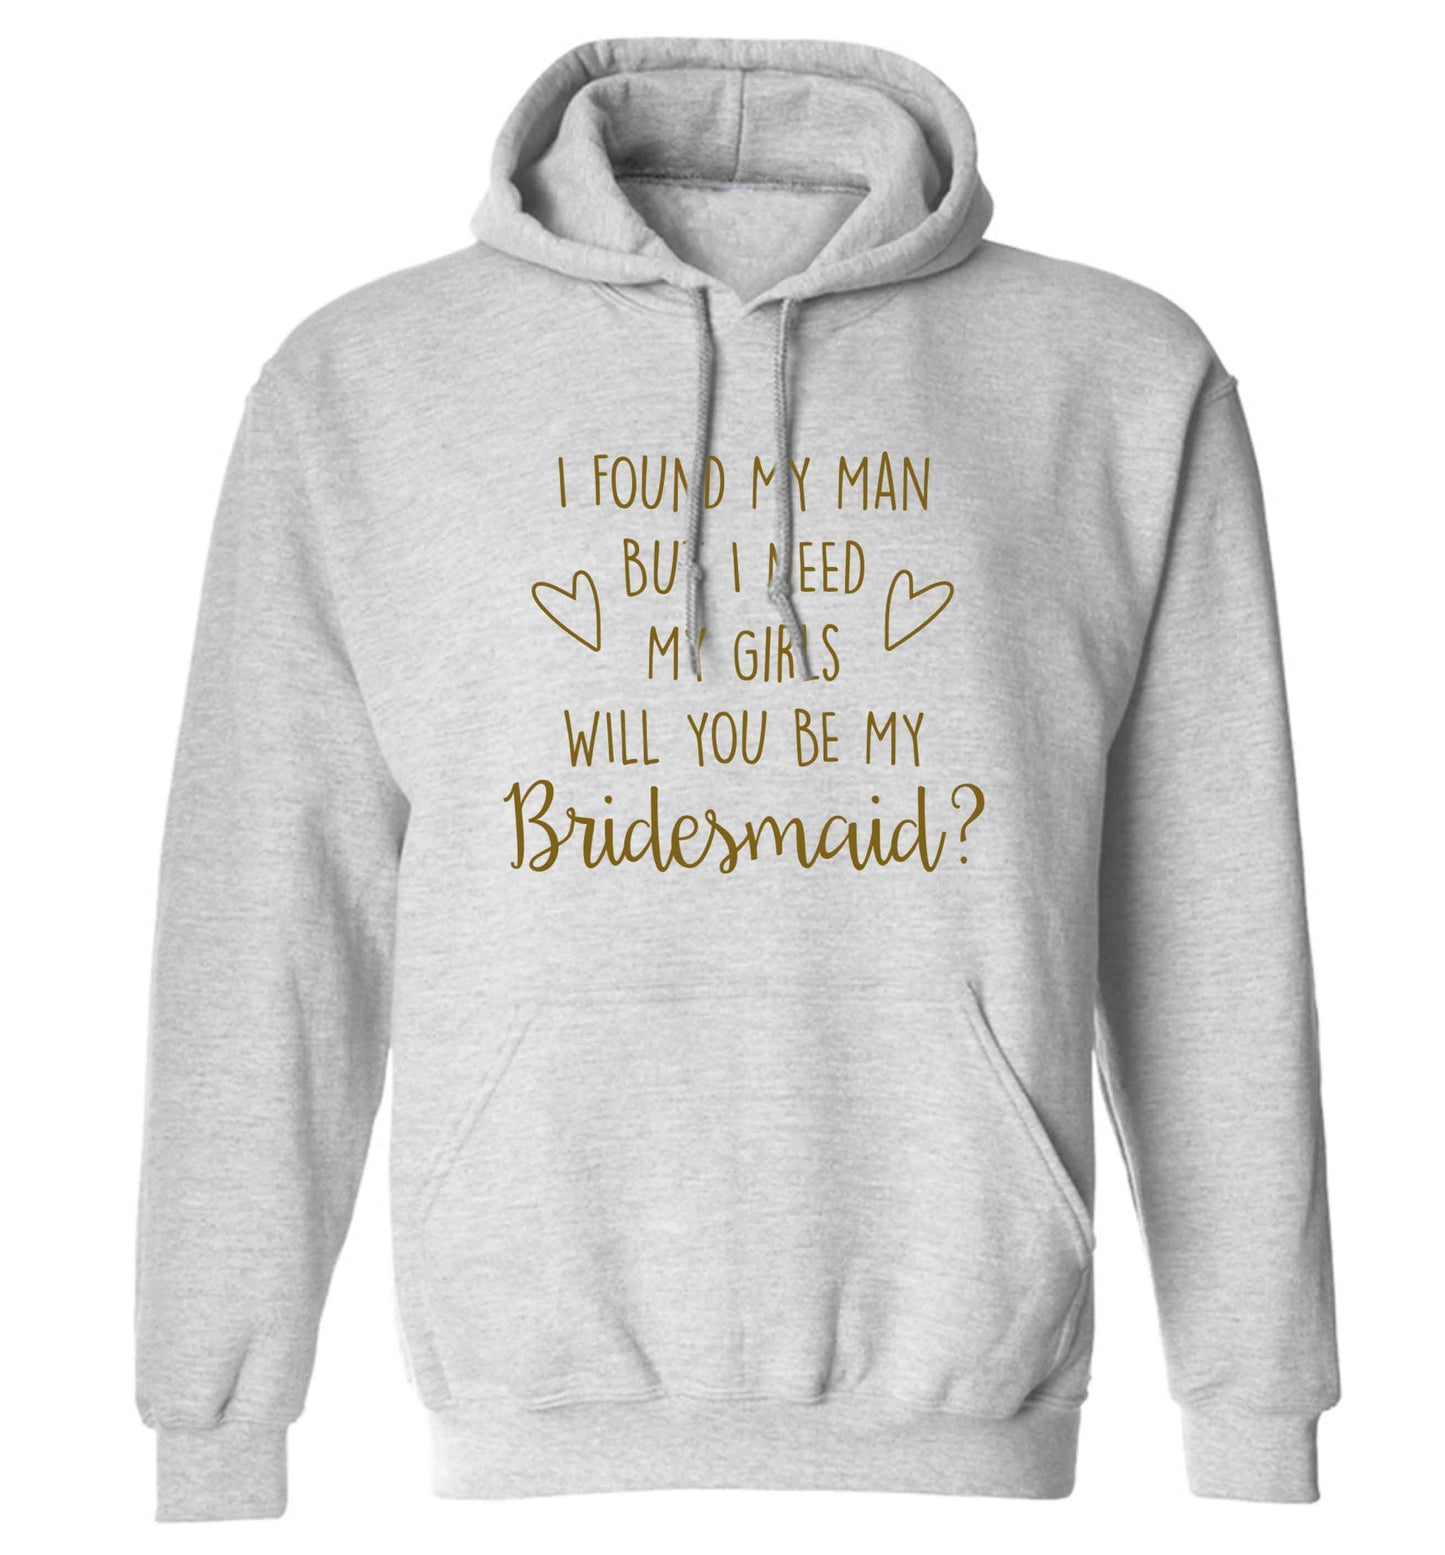 I found my man but I need my girls will you be my bridesmaid? adults unisex grey hoodie 2XL